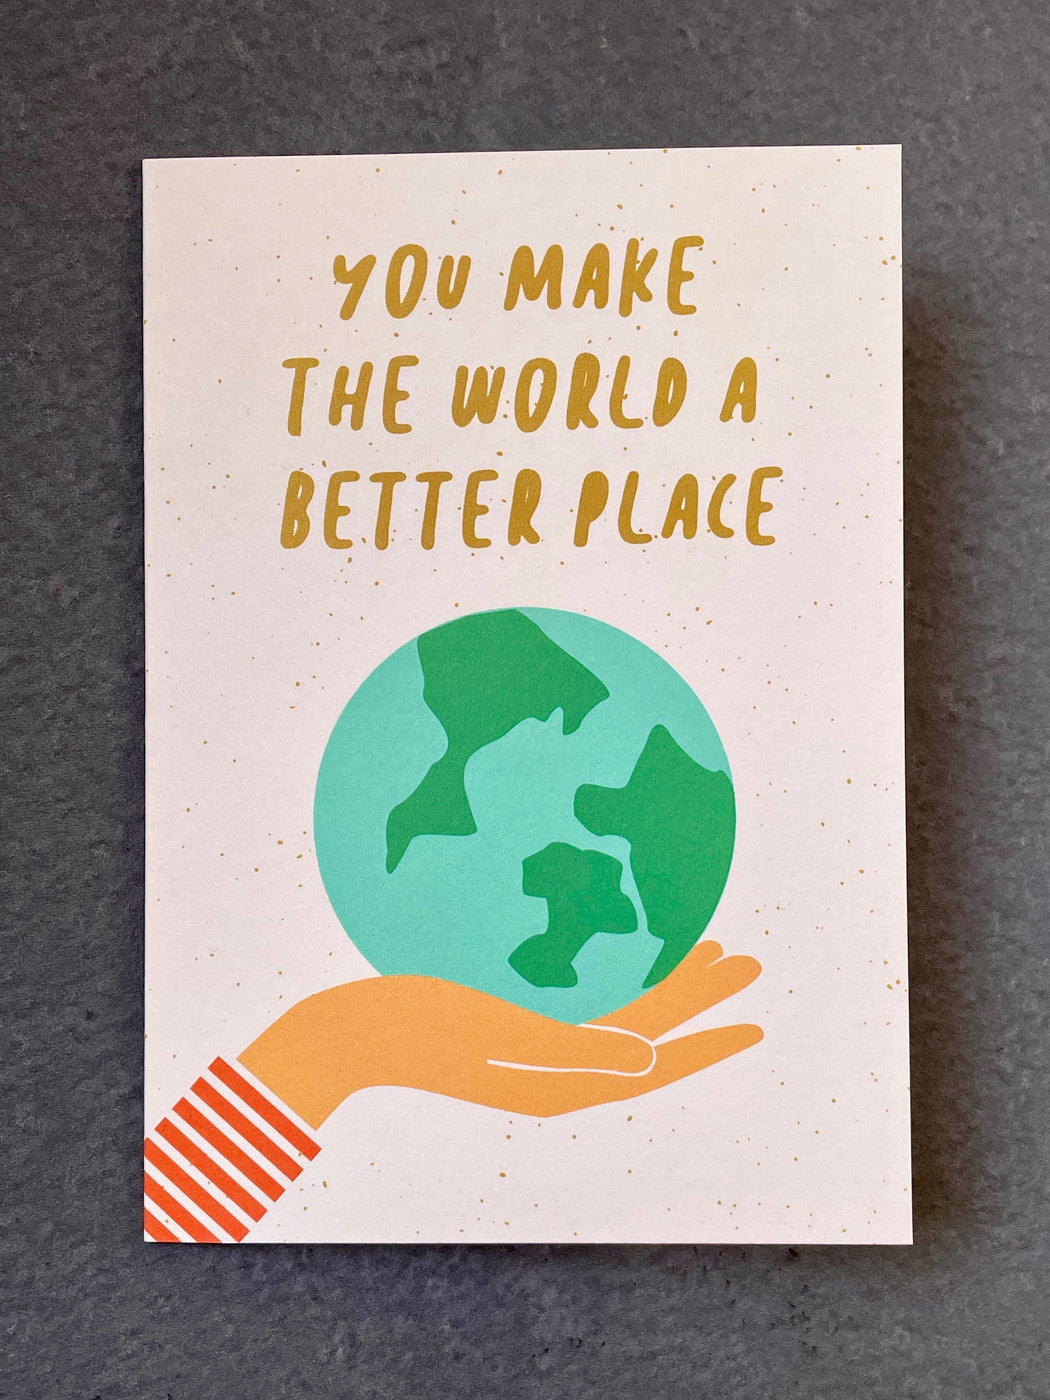 "You Make the World a Better Place" Greeting Card